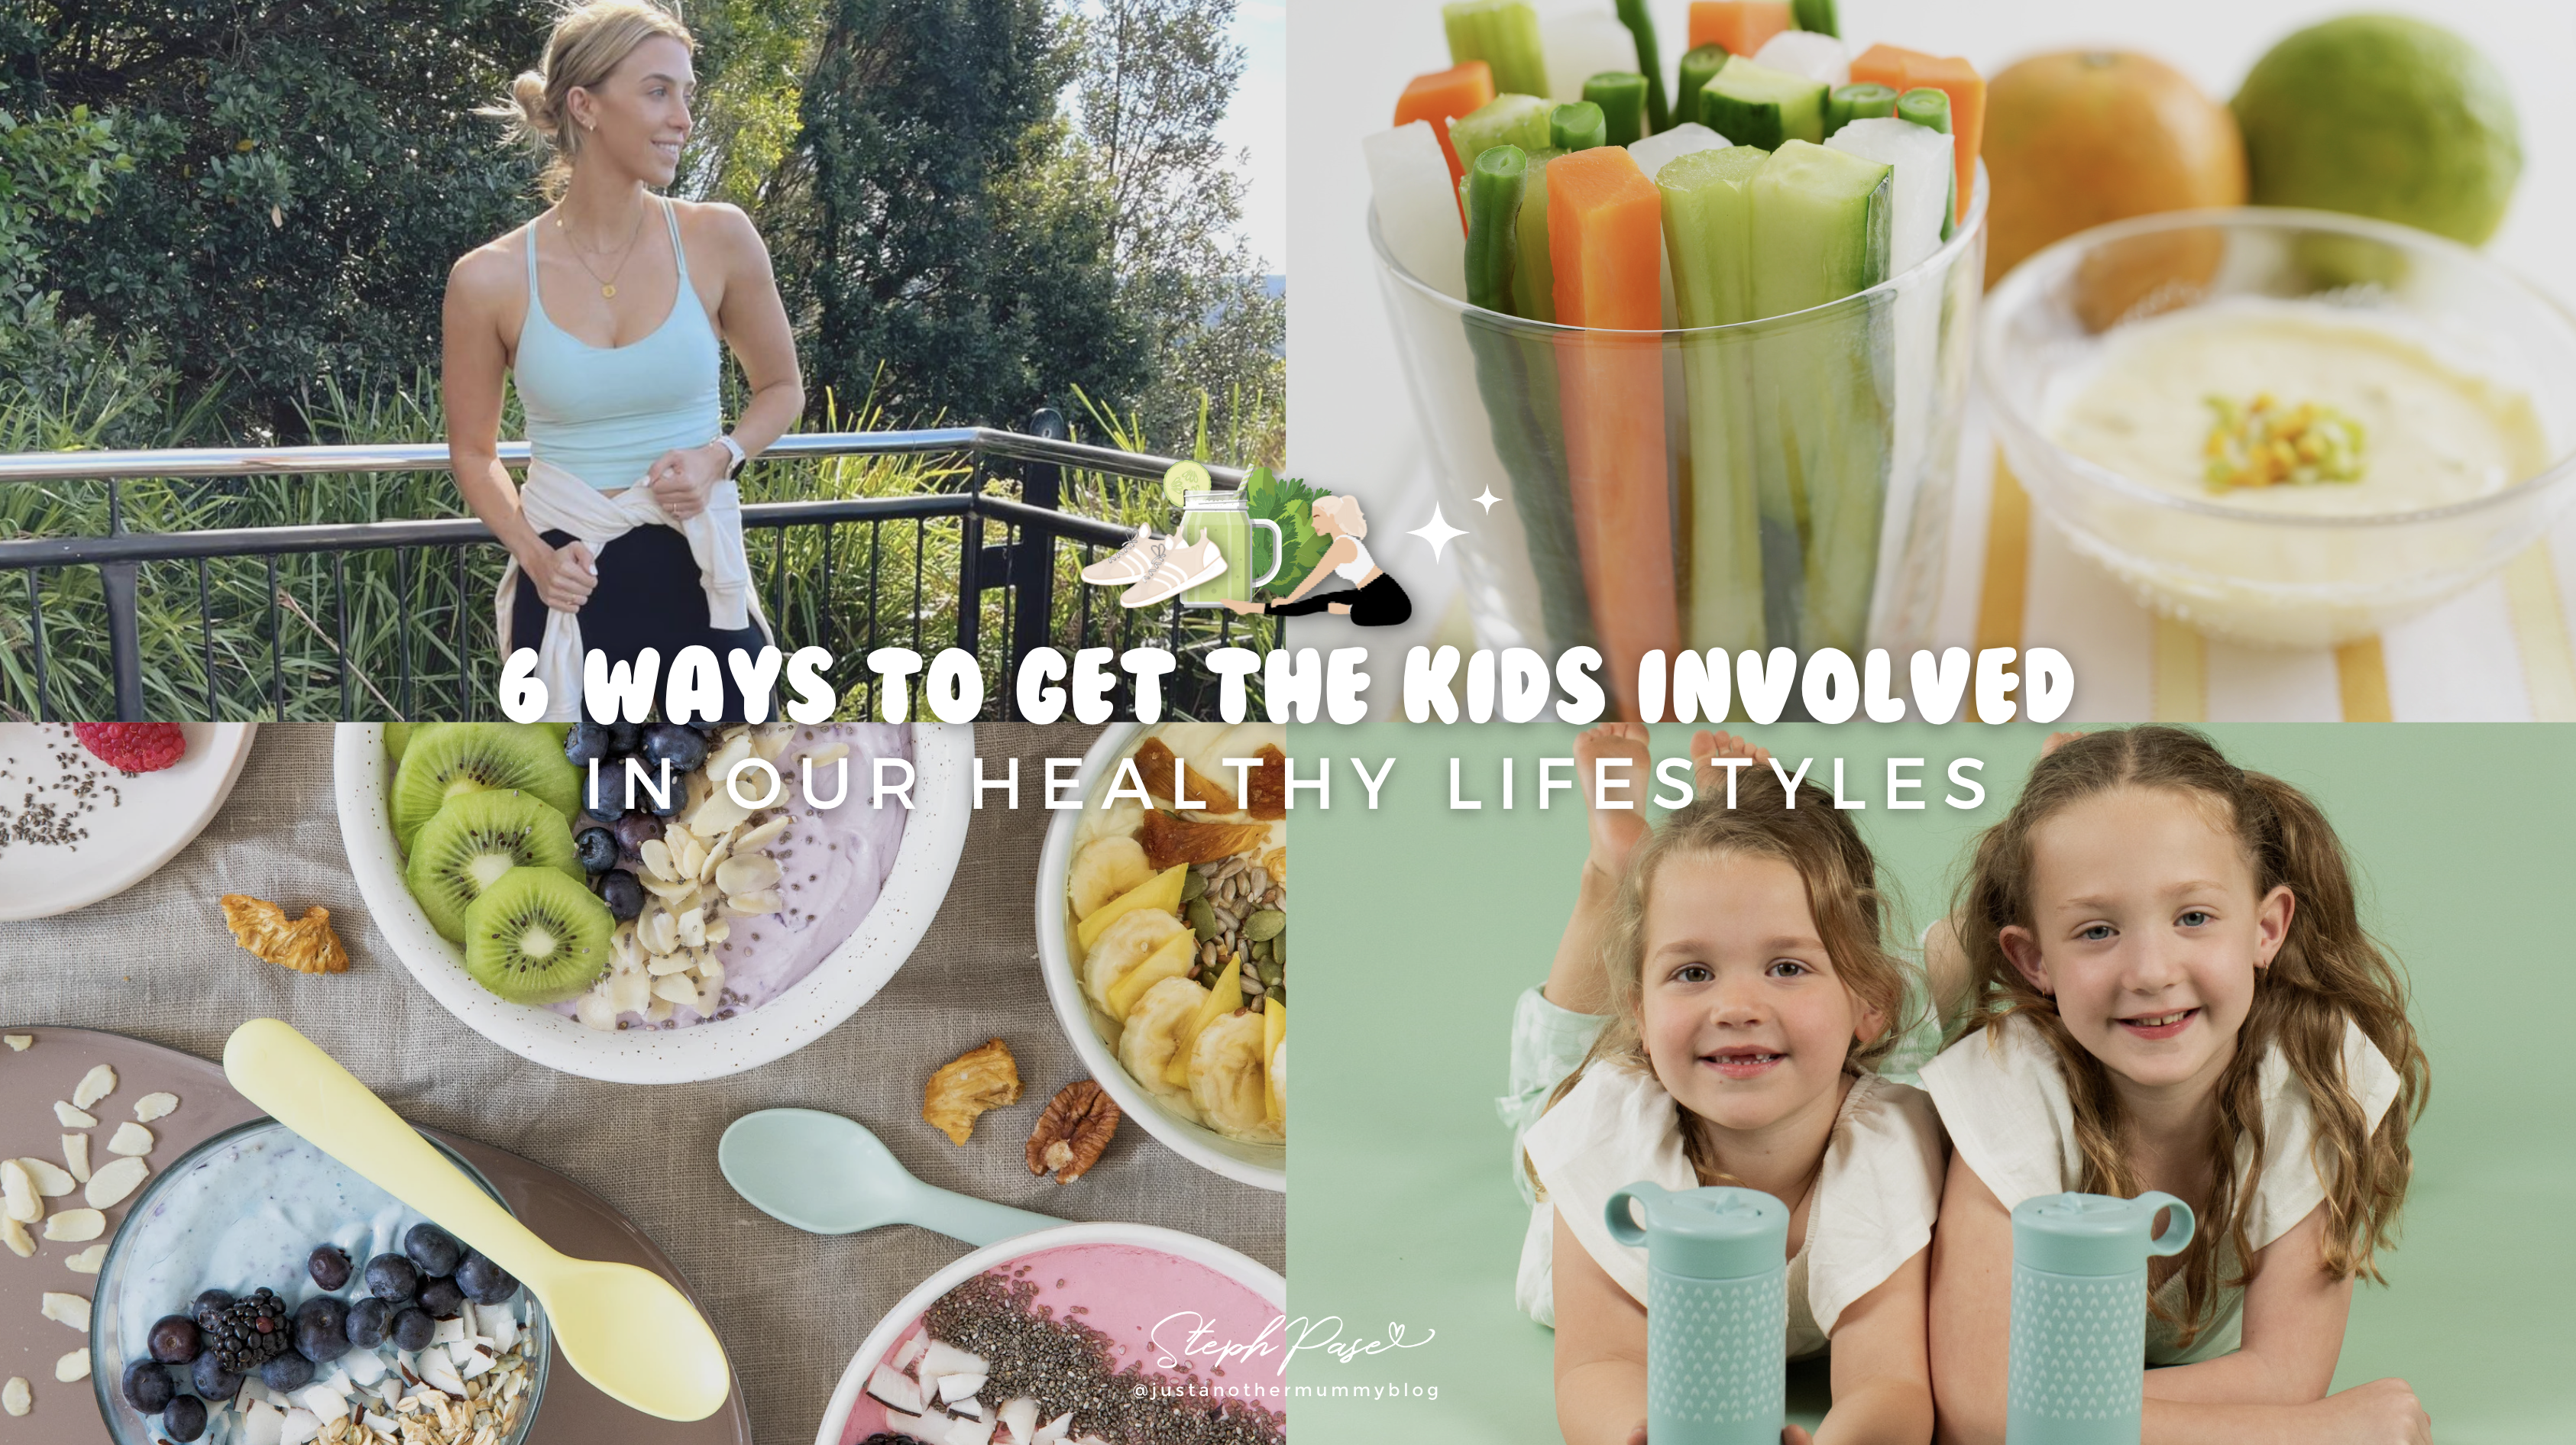 6 WAYS TO GET THE KIDS INVOLVED IN OUR HEALTHY LIFESTYLES